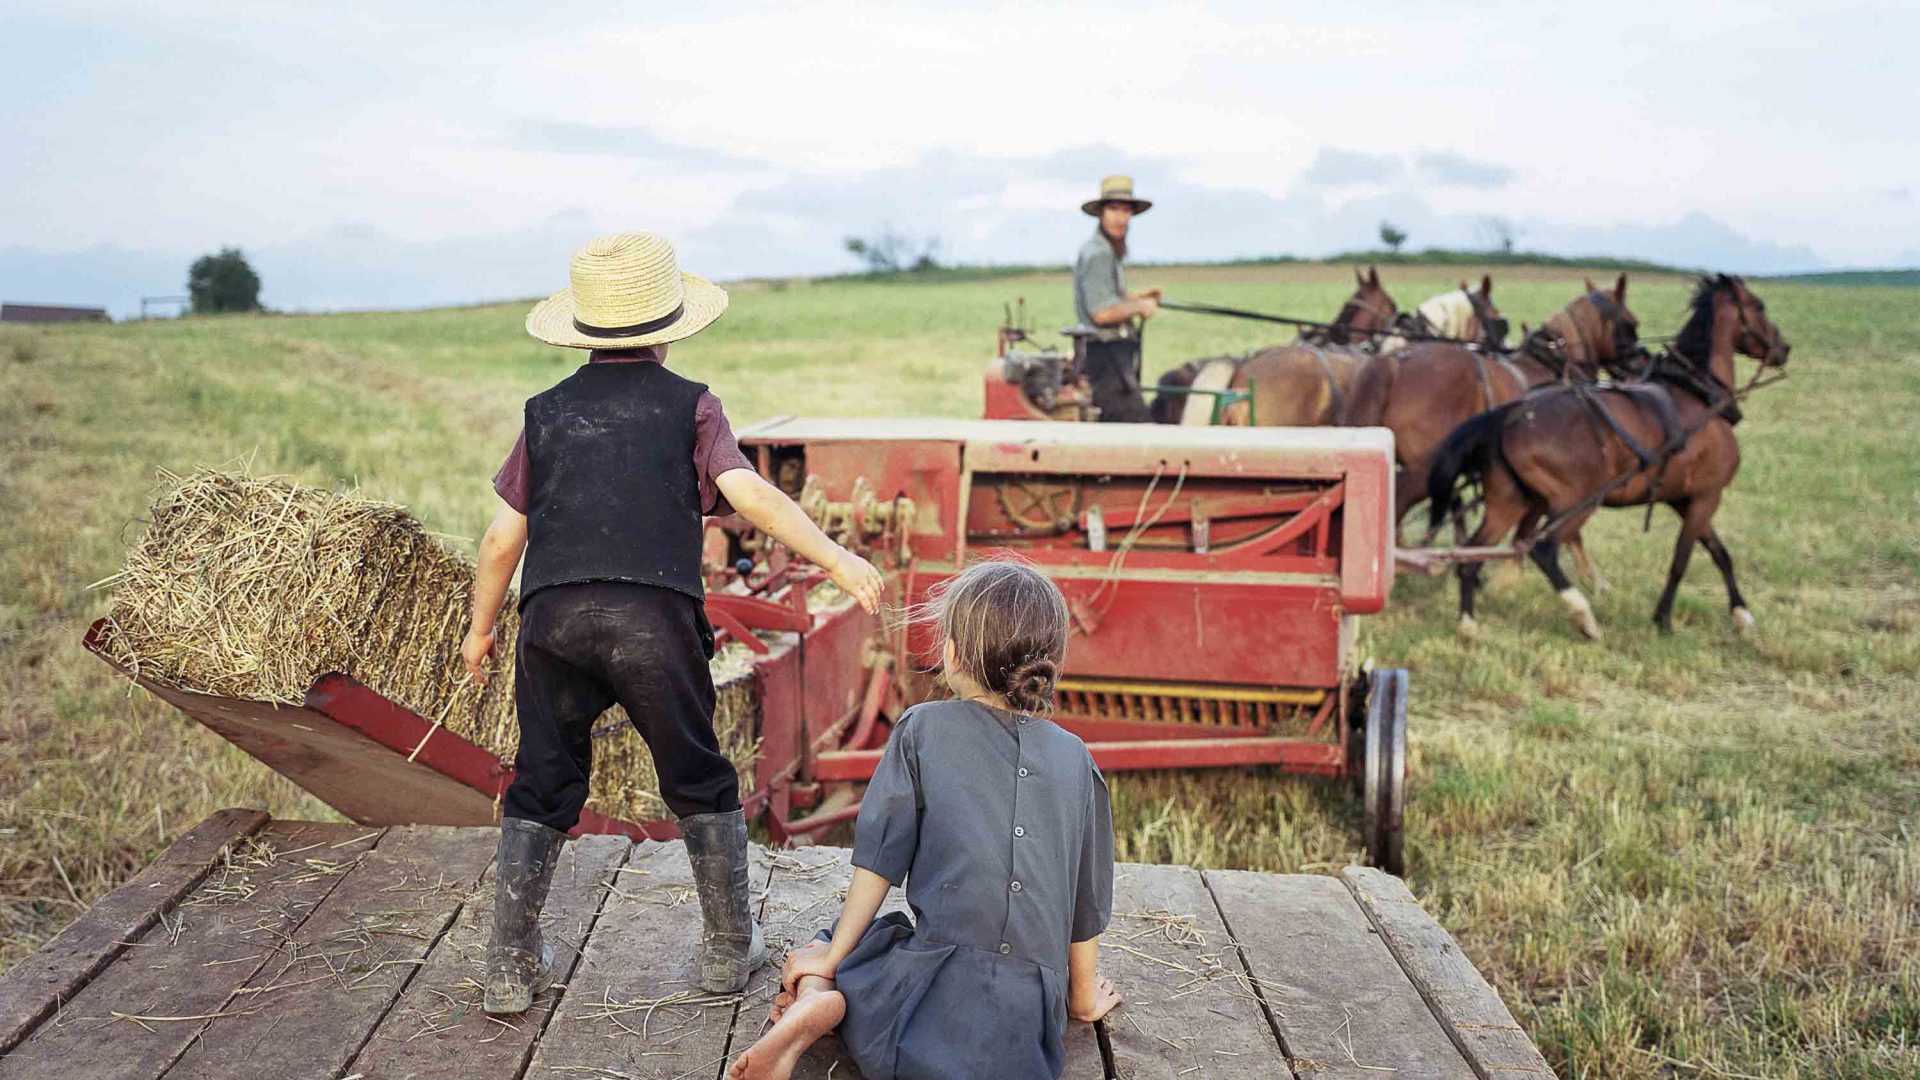 Two children watch on as a man uses horses and some farm machinery.